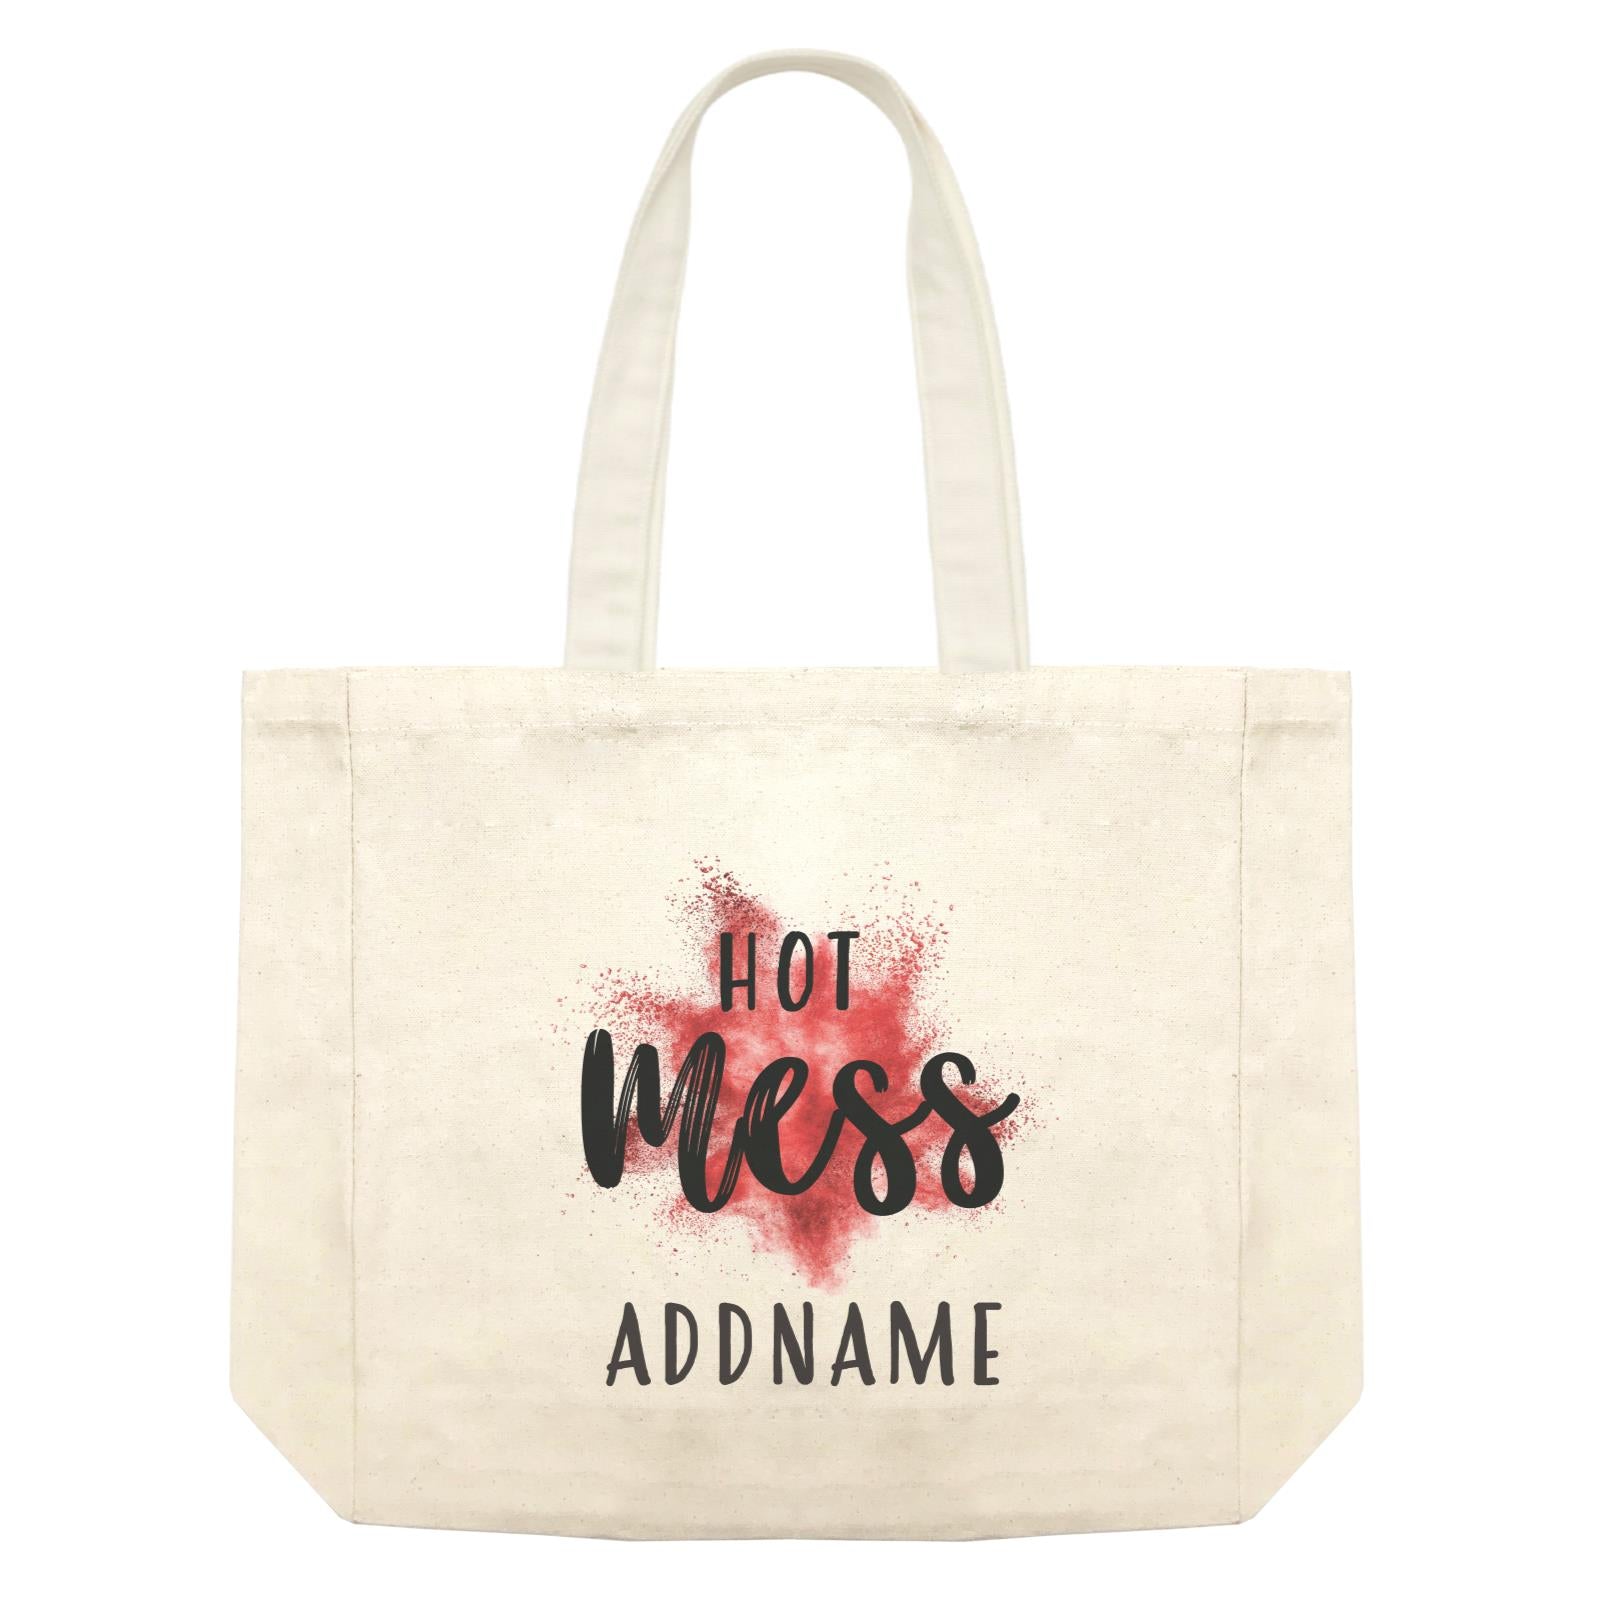 Make Up Quotes Hot Mess Addname Shopping Bag